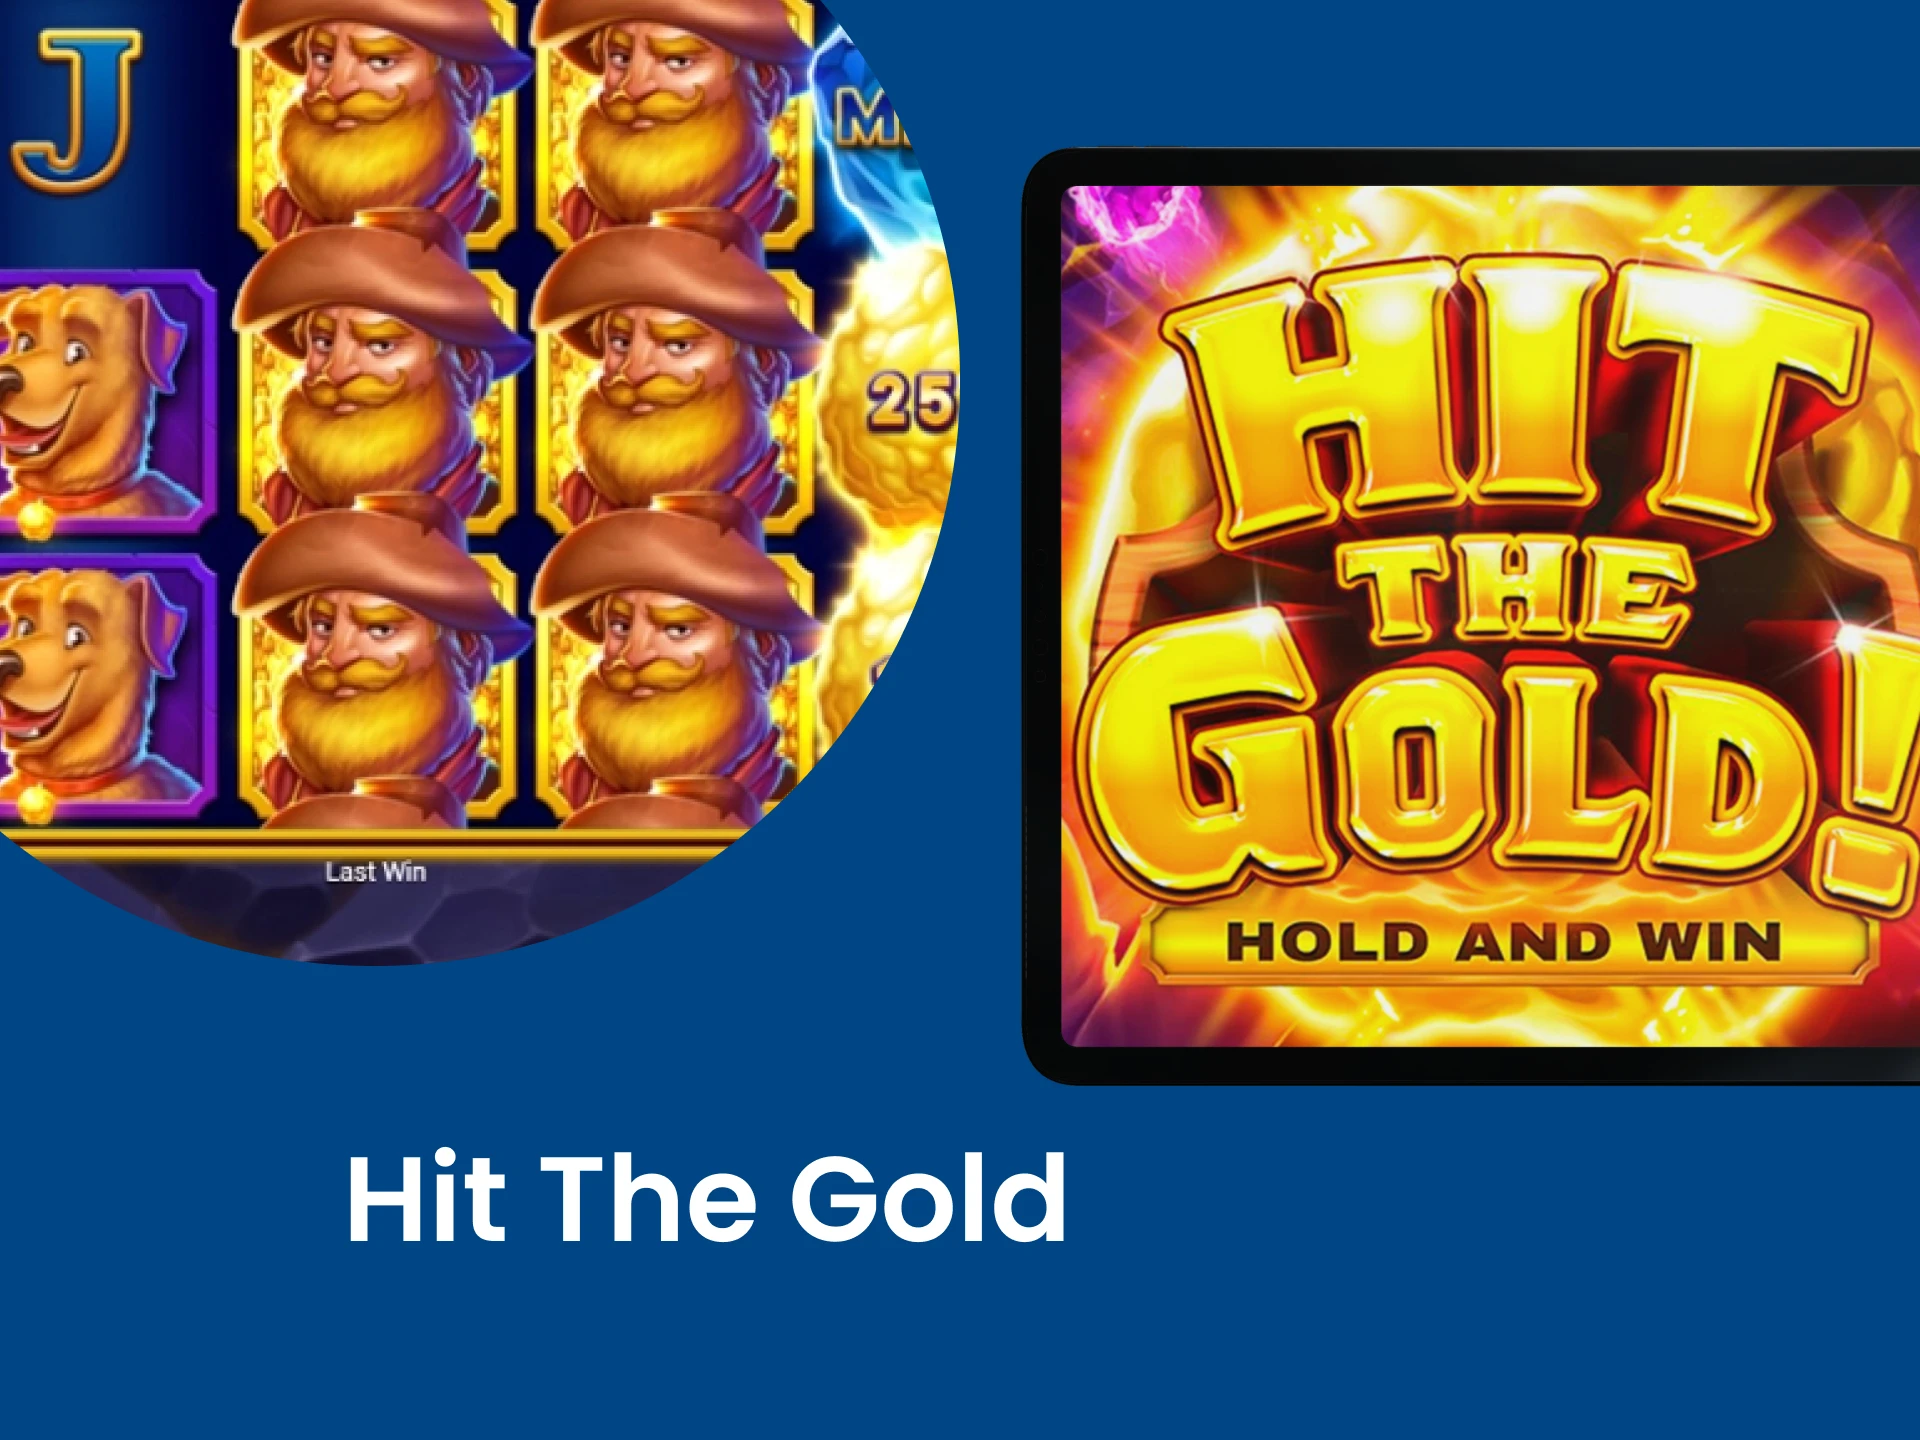 For gaming on your iPad, choose Hit the Gold.